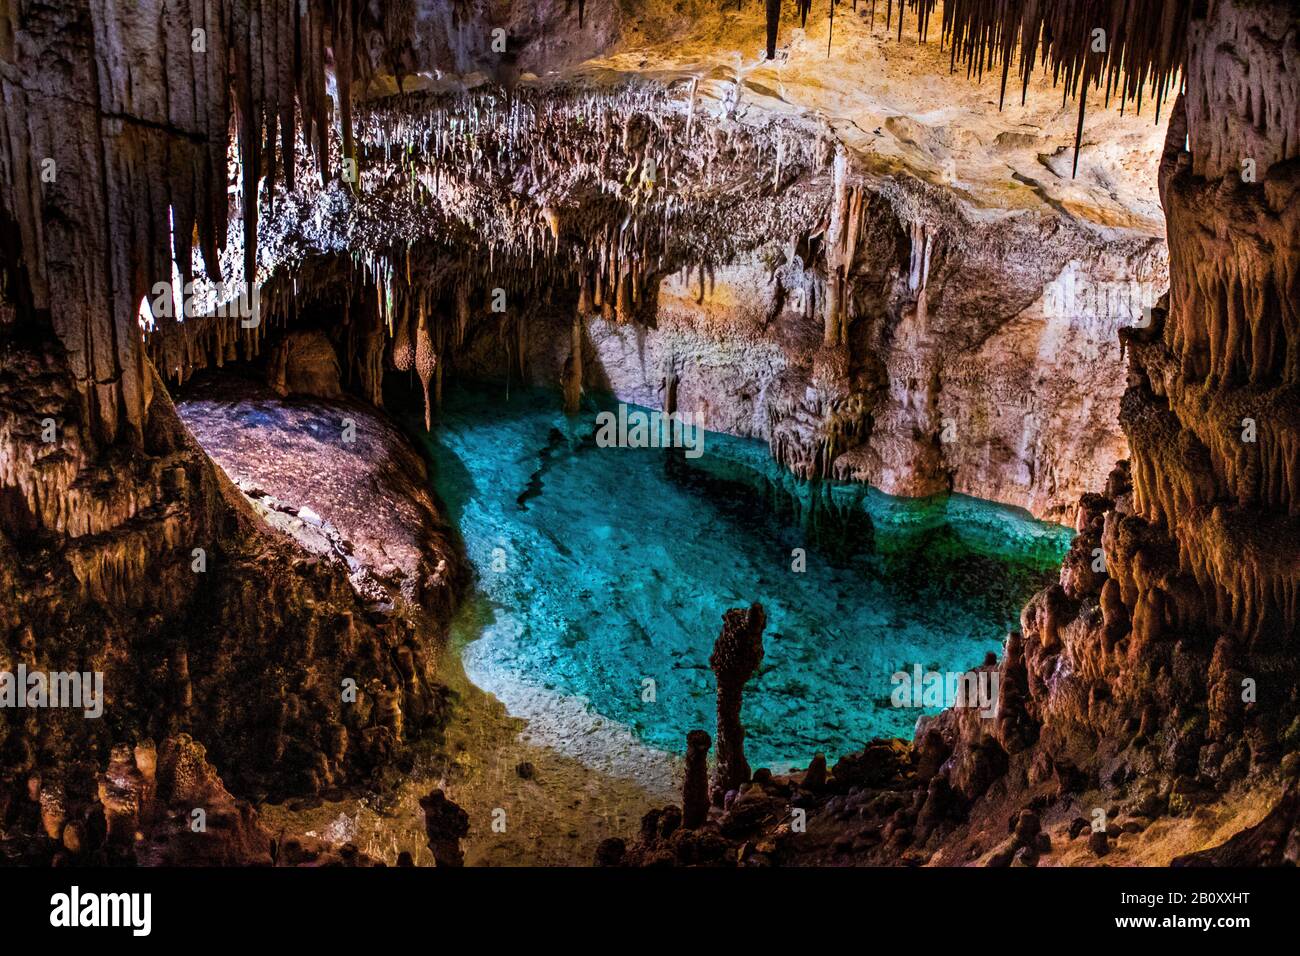 show cave Coves del Drac, Caves of Drach and underground lake, Spain, Balearic Islands, Majorca, Porto Christo Stock Photo